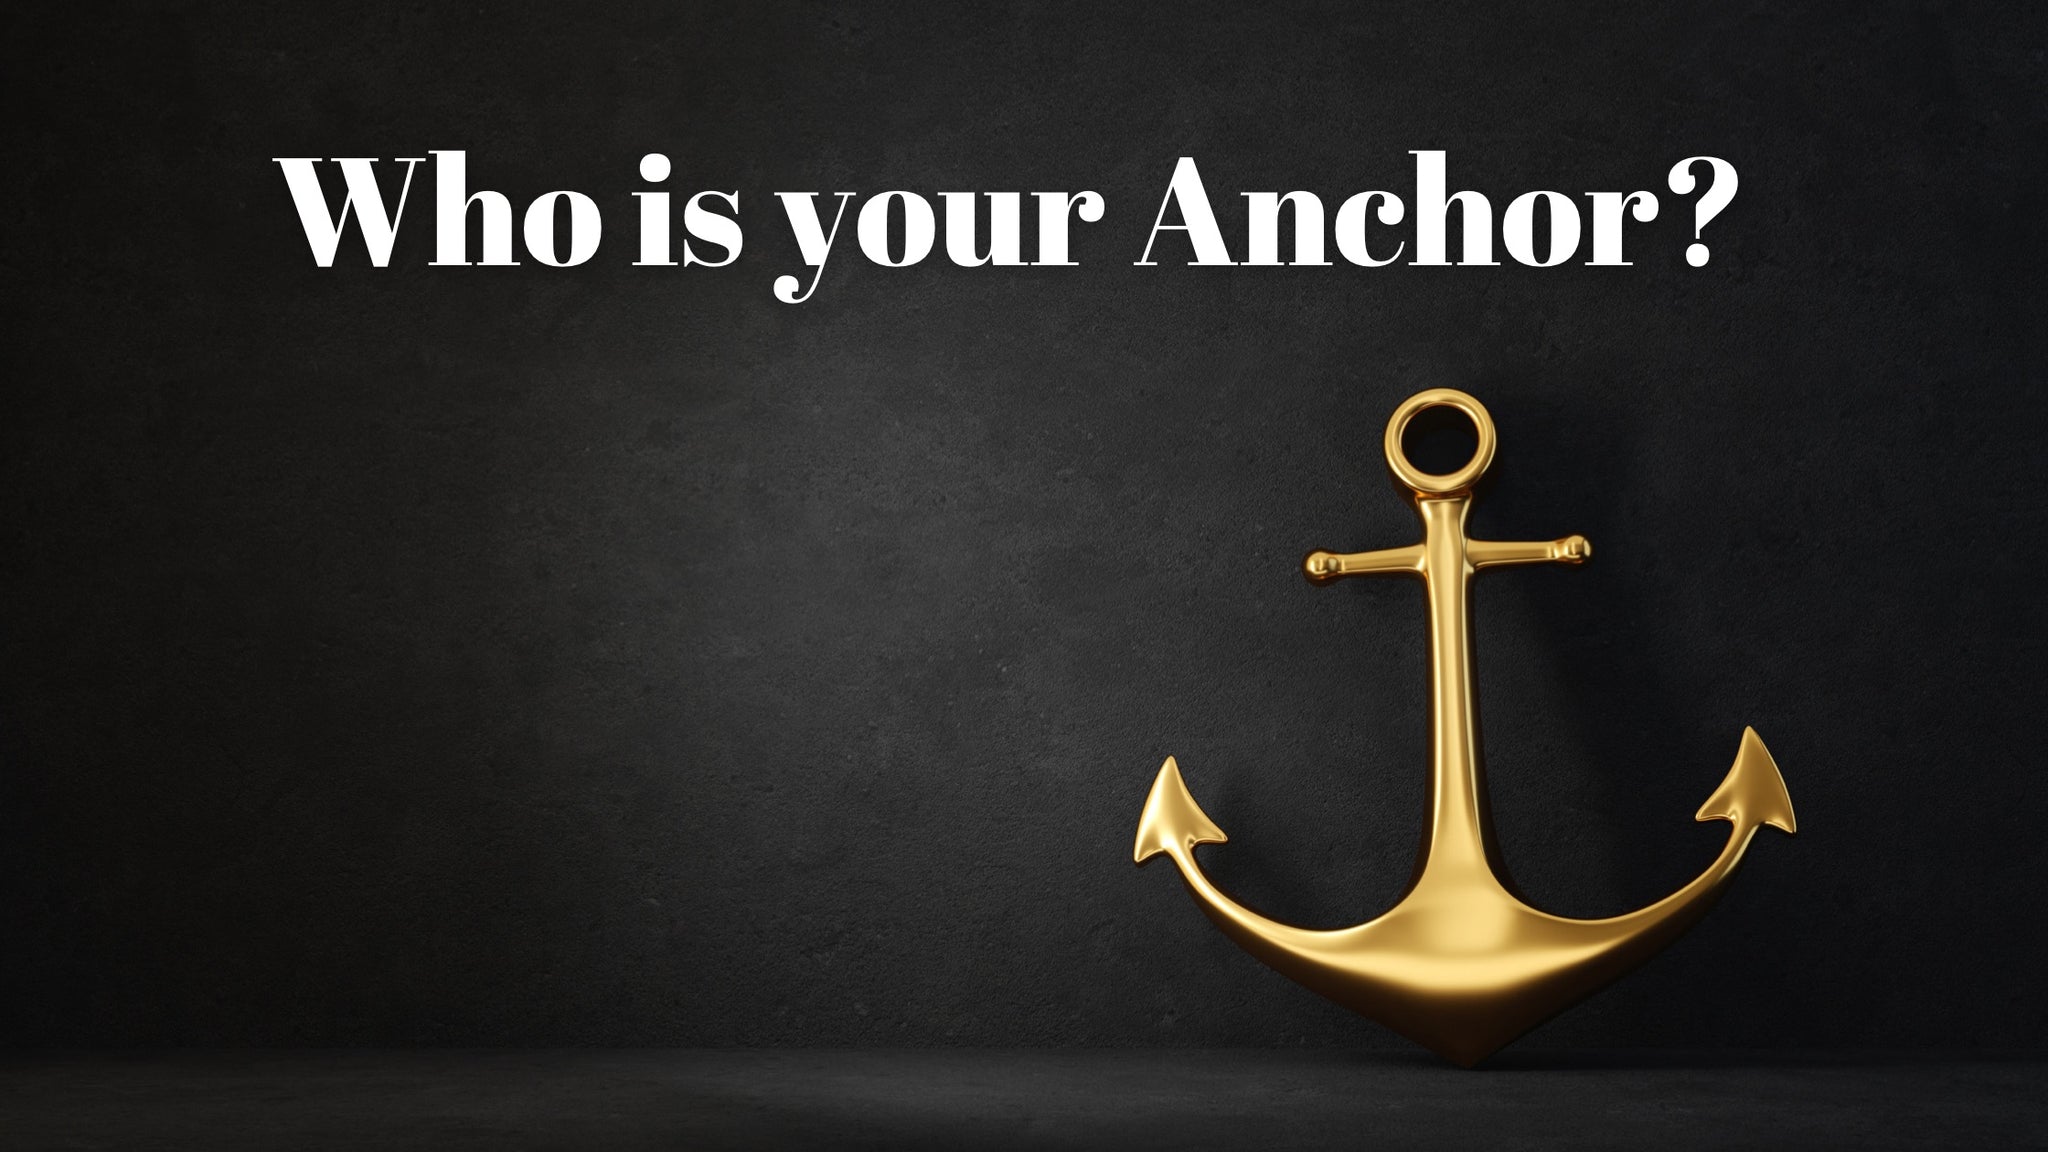 Who is your Anchor?